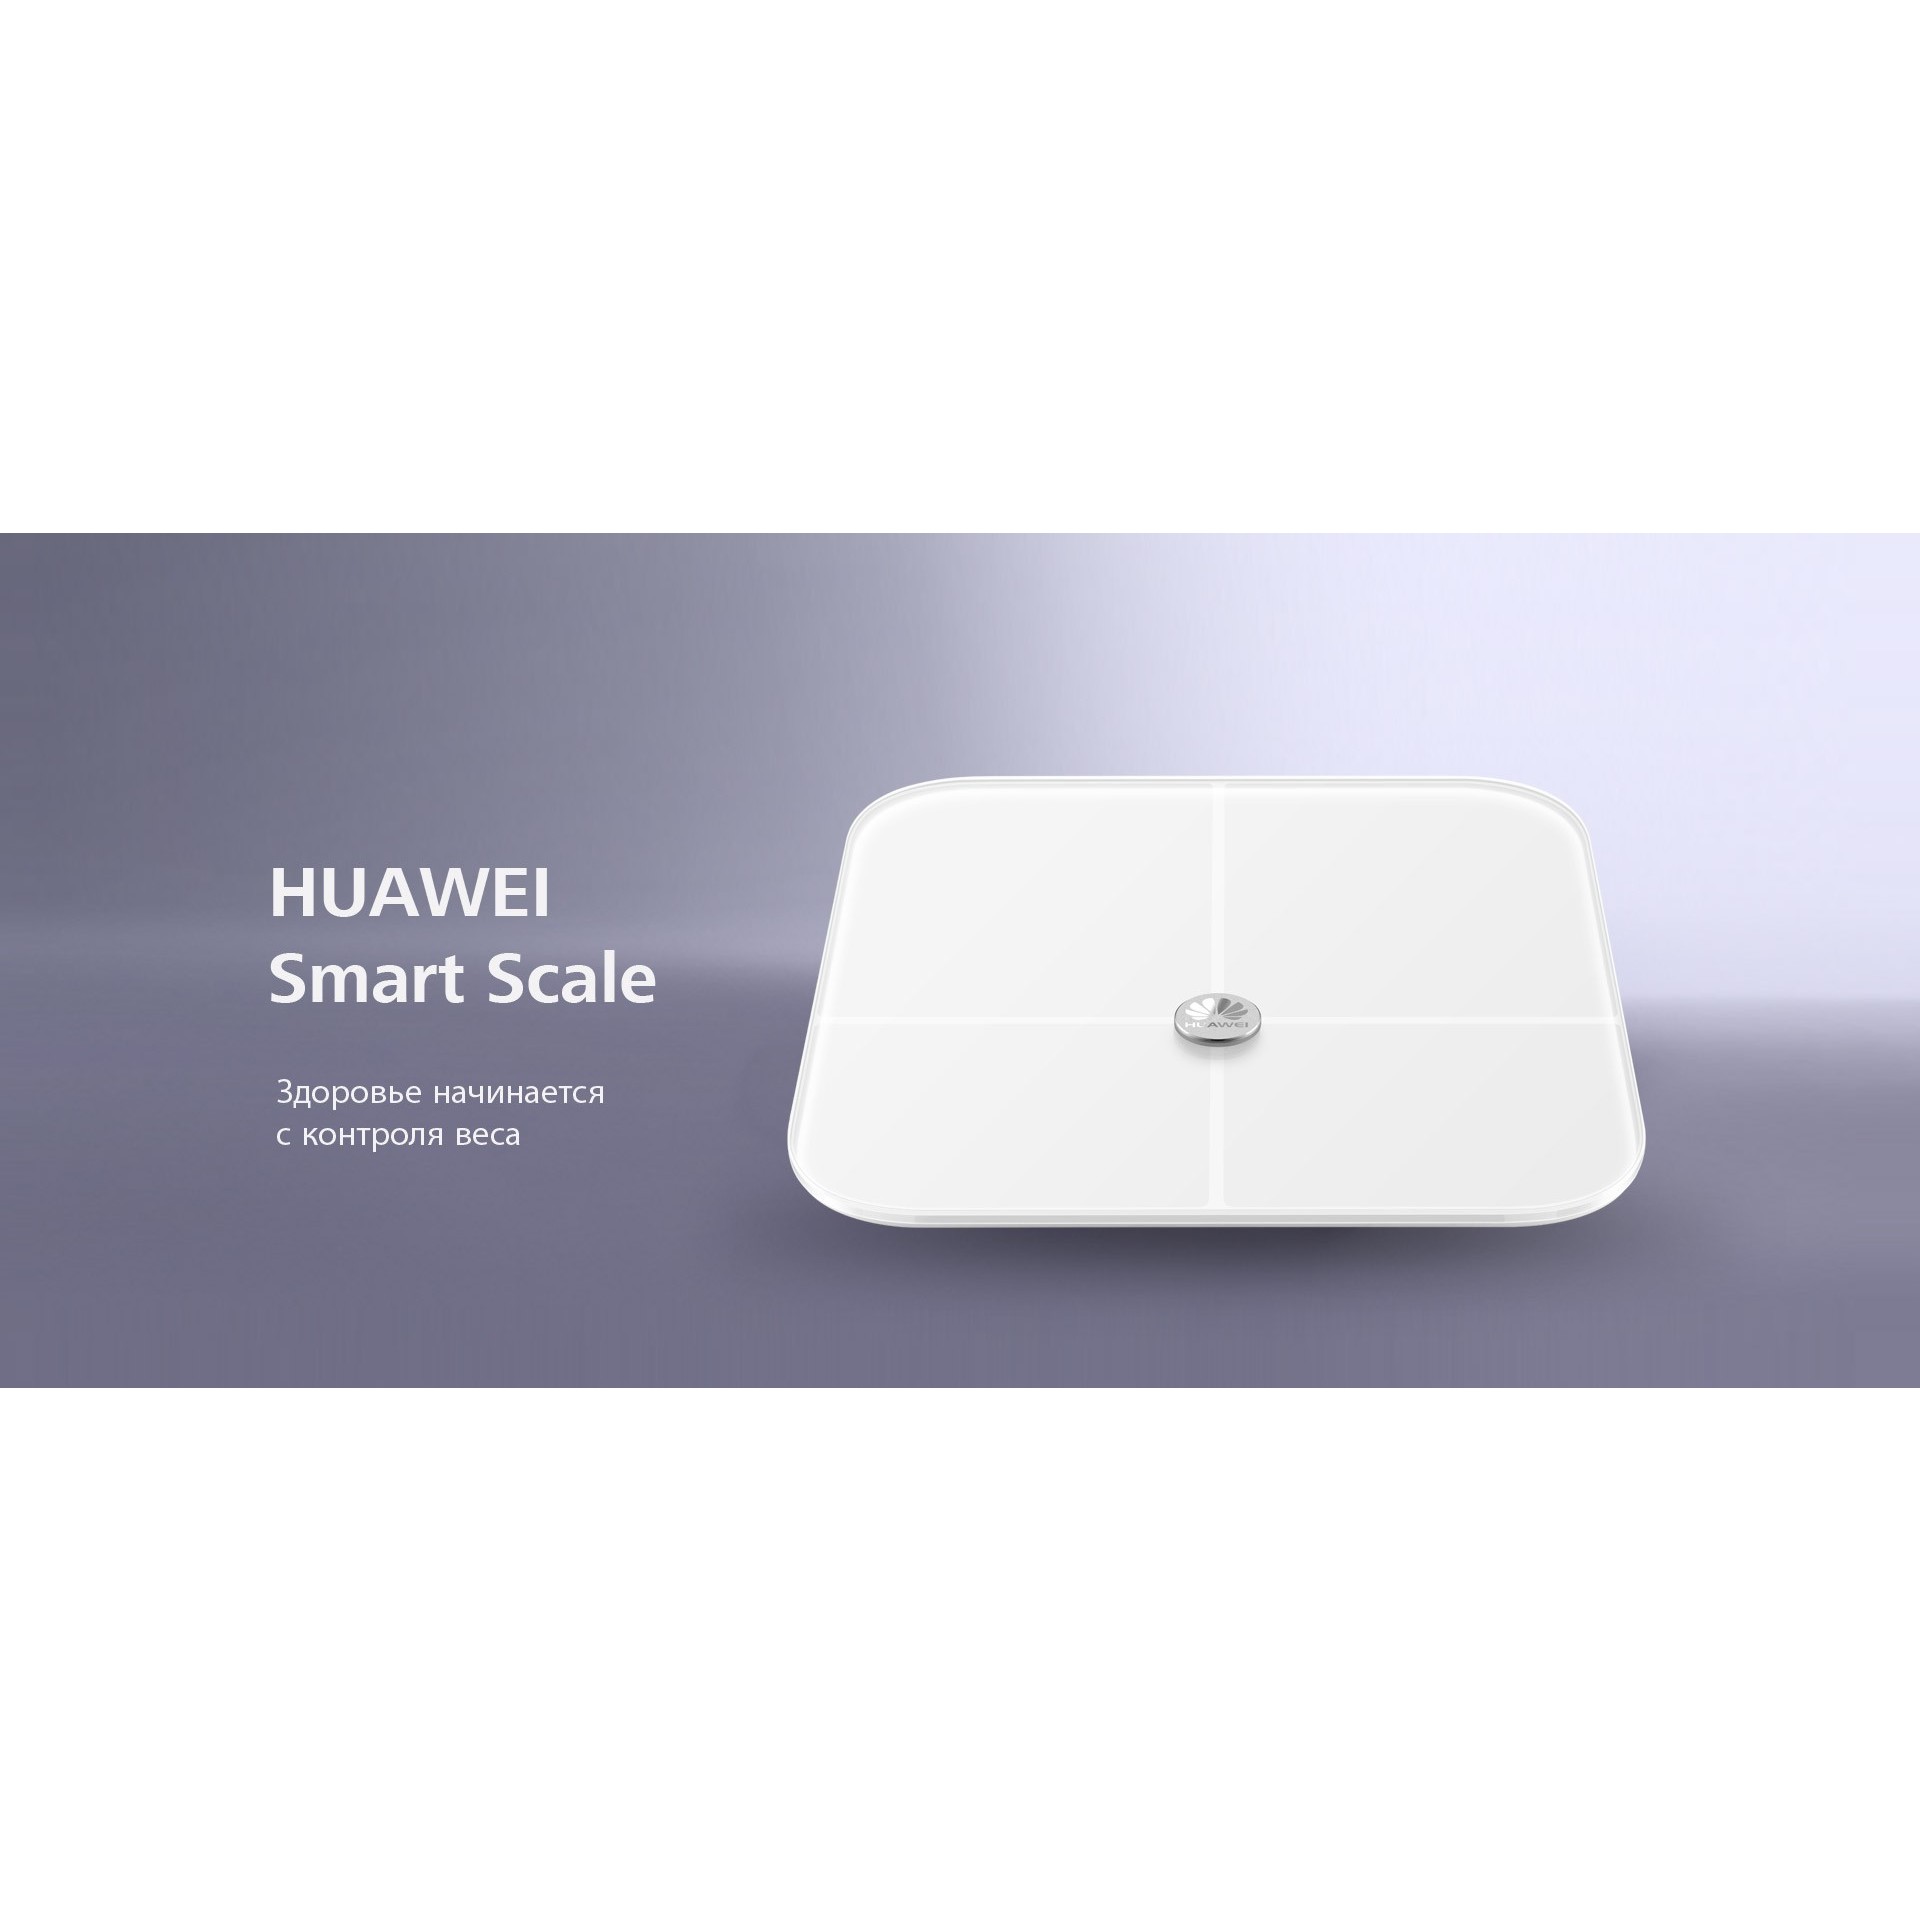 Huawei ah100 body fat Scale WH. Весы Huawei ah100 body fat Scale WH. Весы Huawei body fat Scale 3. Умные весы Huawei.